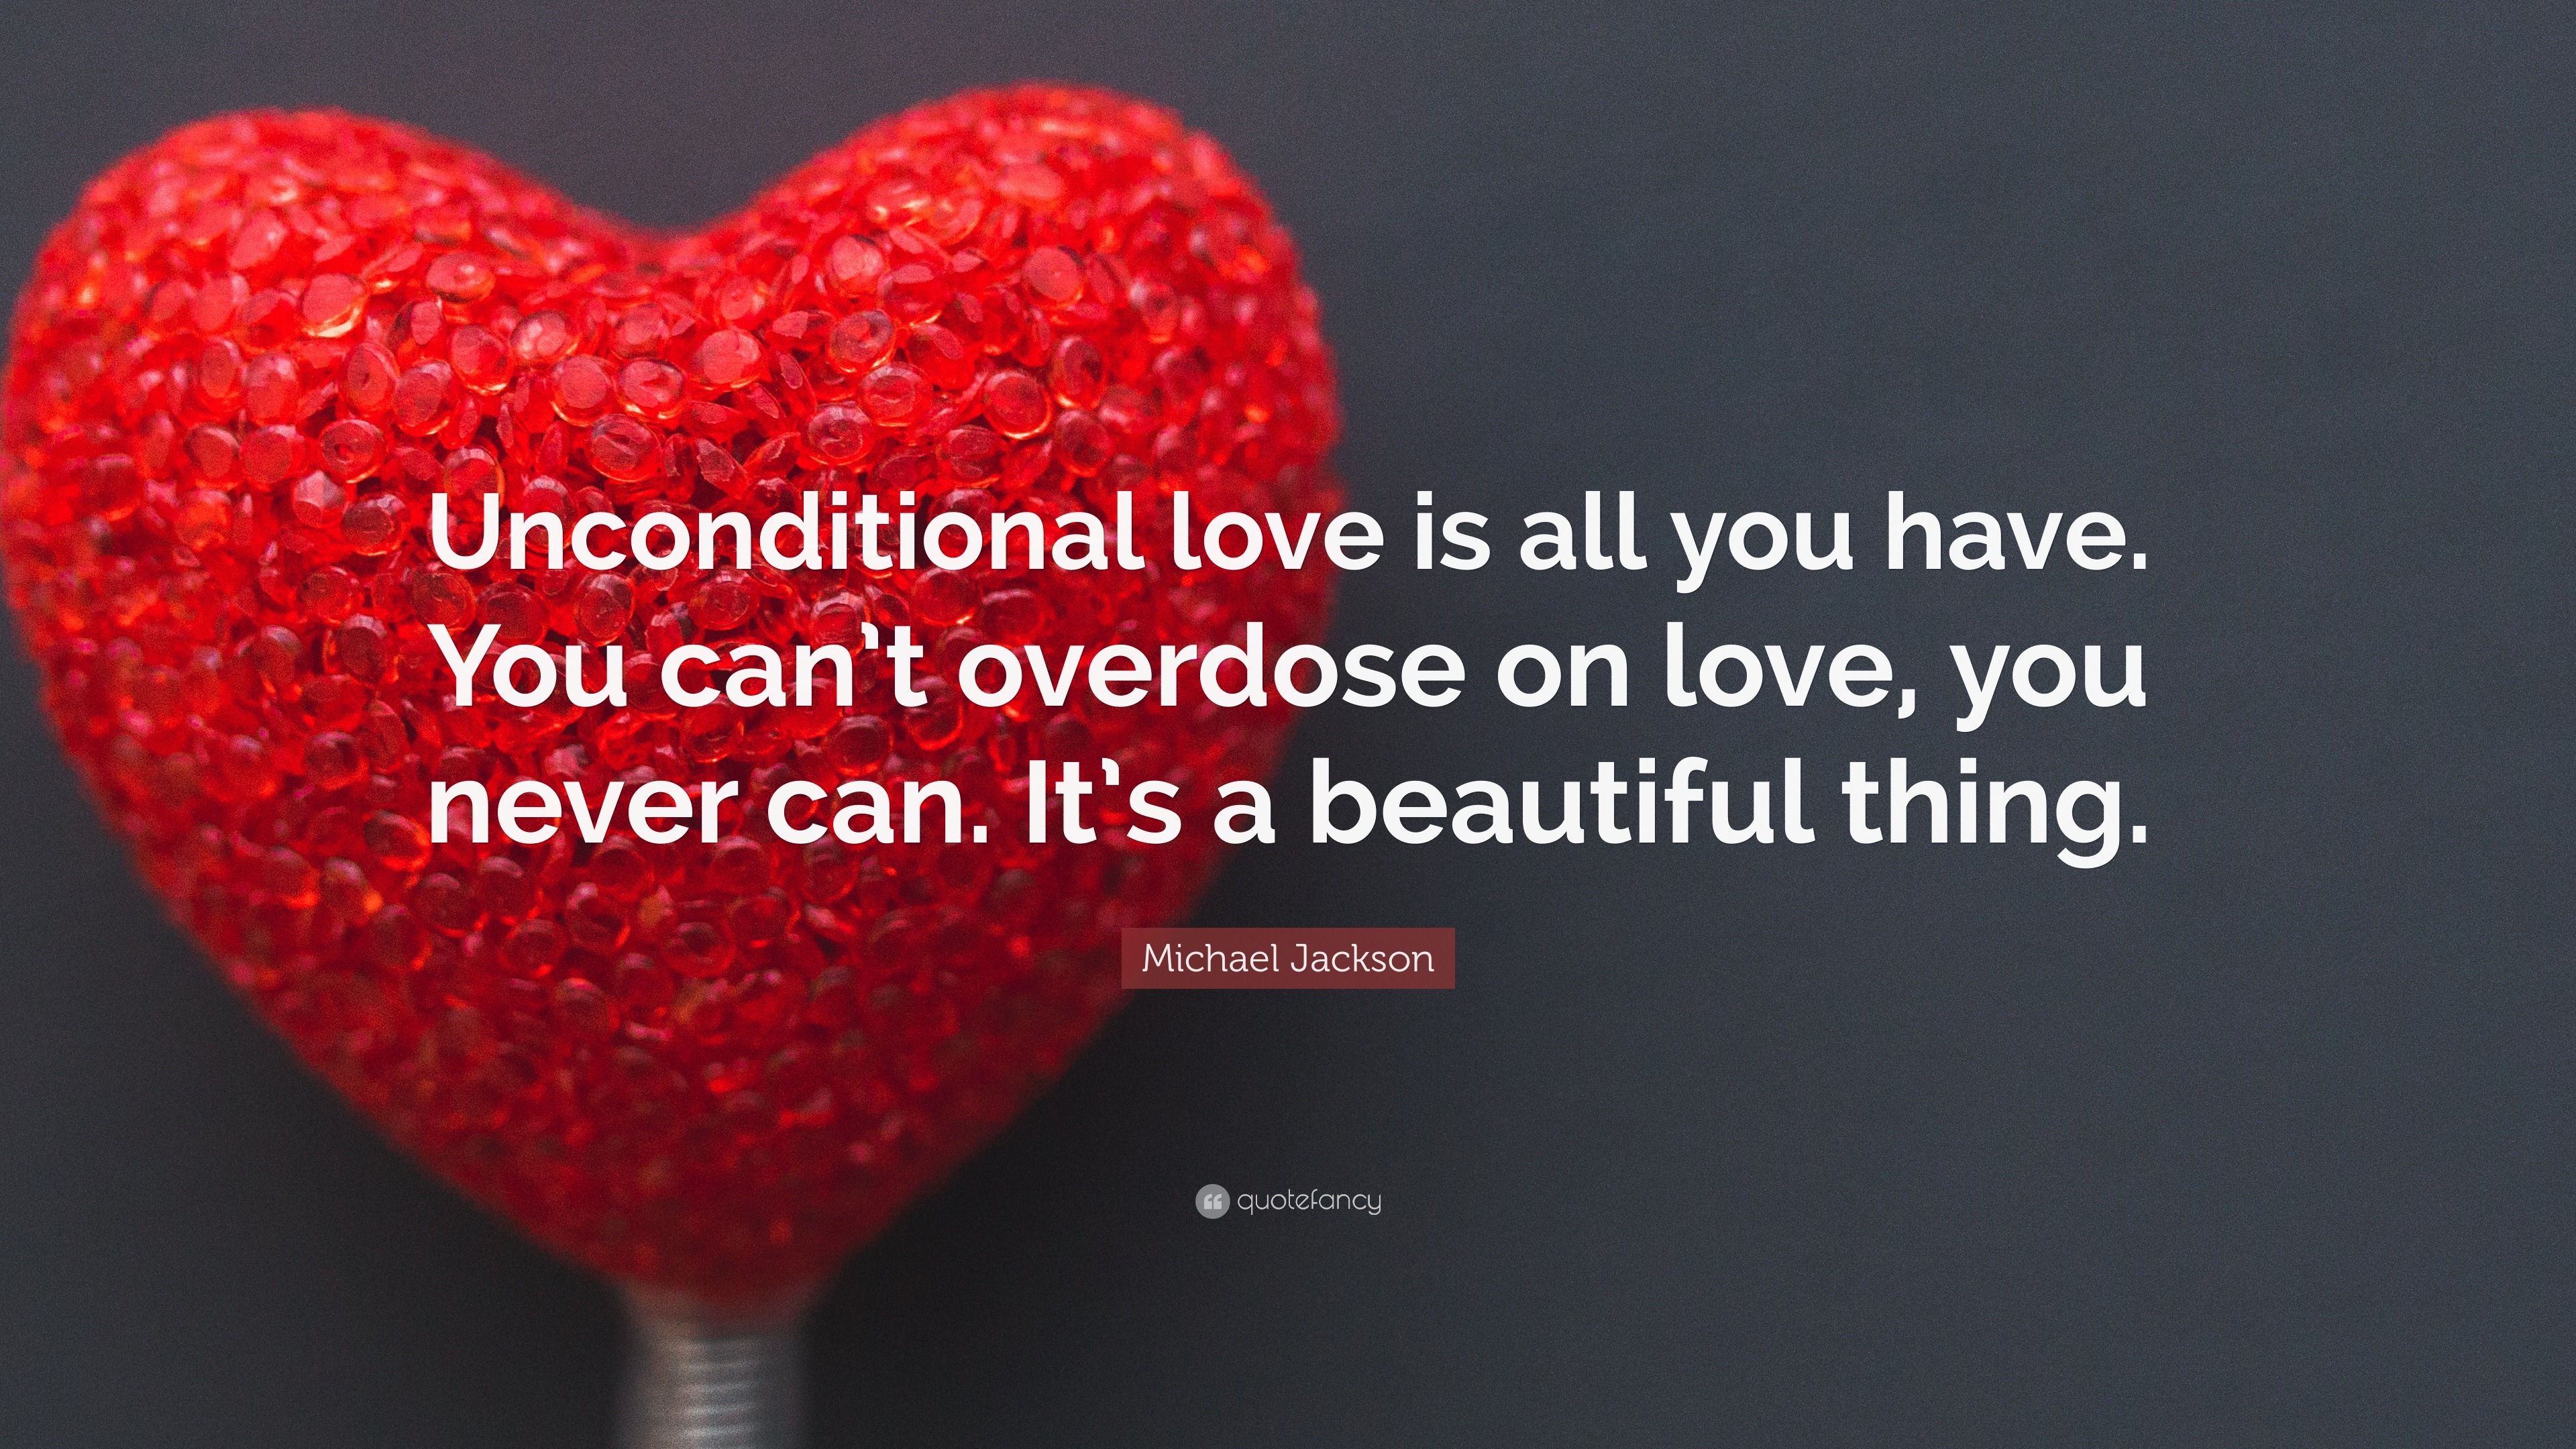 Michael Jackson Quote “Unconditional love is all you have You can t